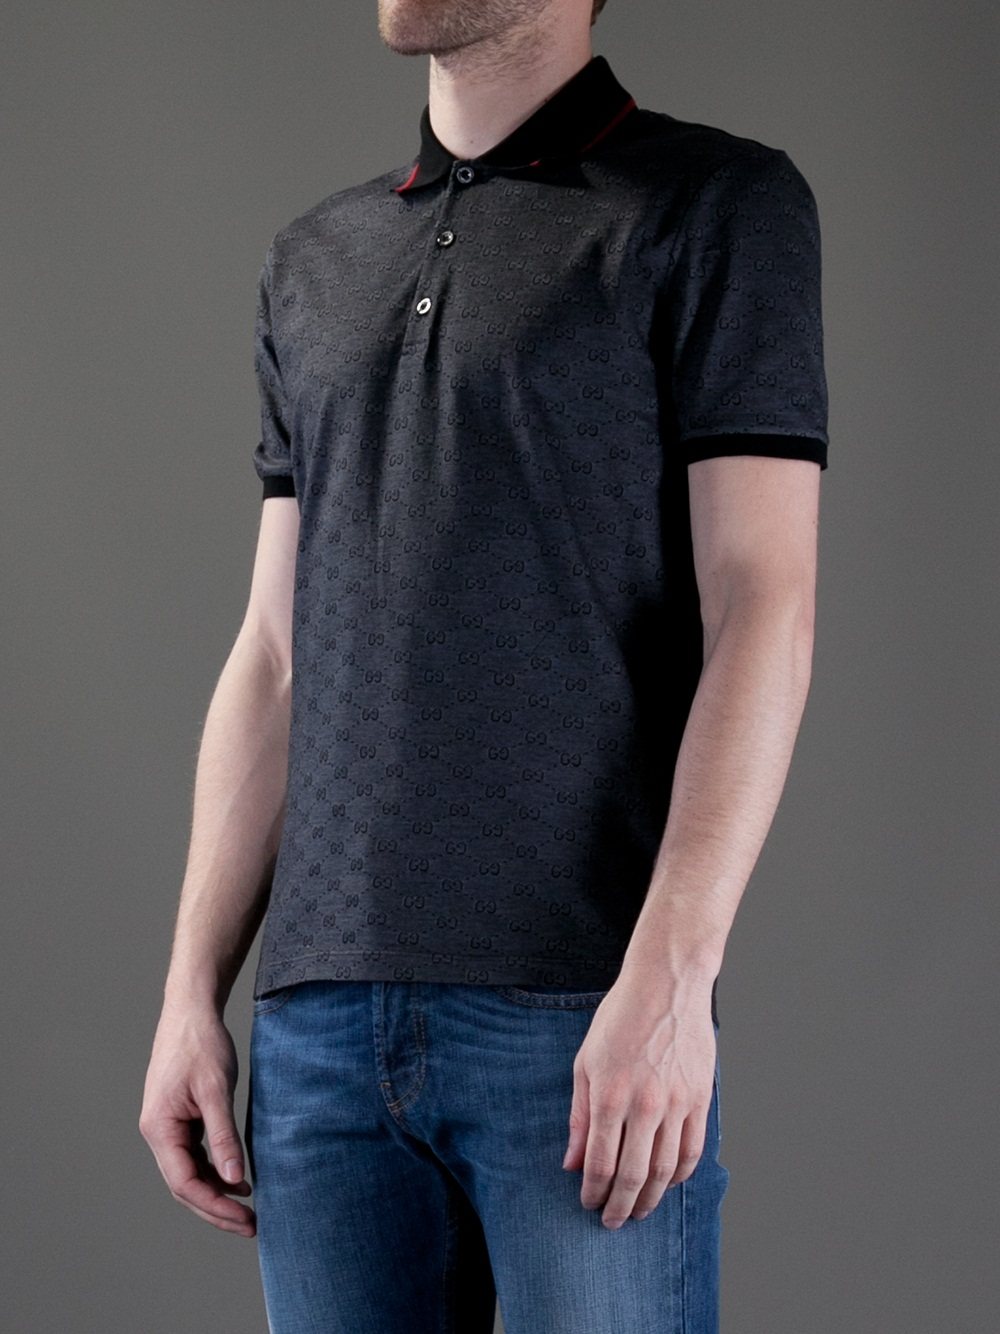 Gucci Monogram Polo Shirt in Black for Men - Lyst